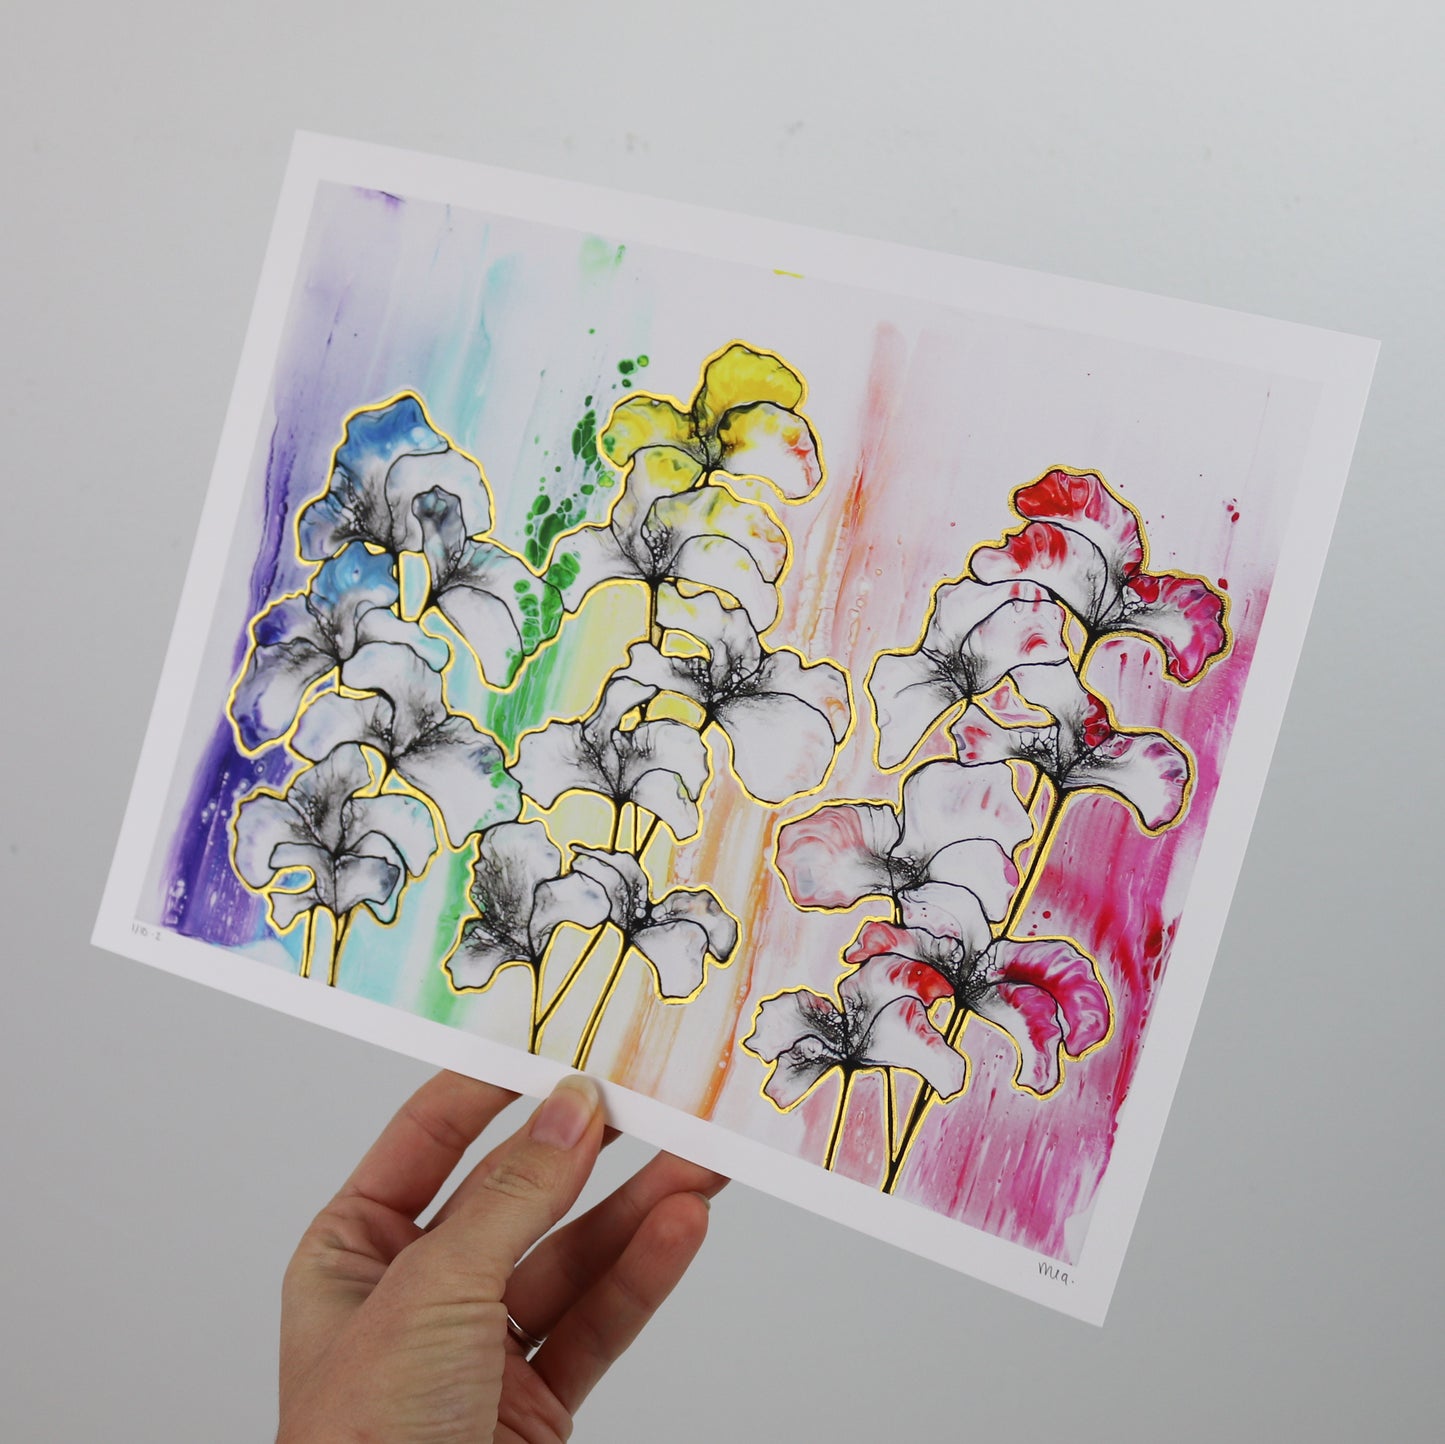 Second Edition Print: "Rainbow Flowers" Hand Embellished